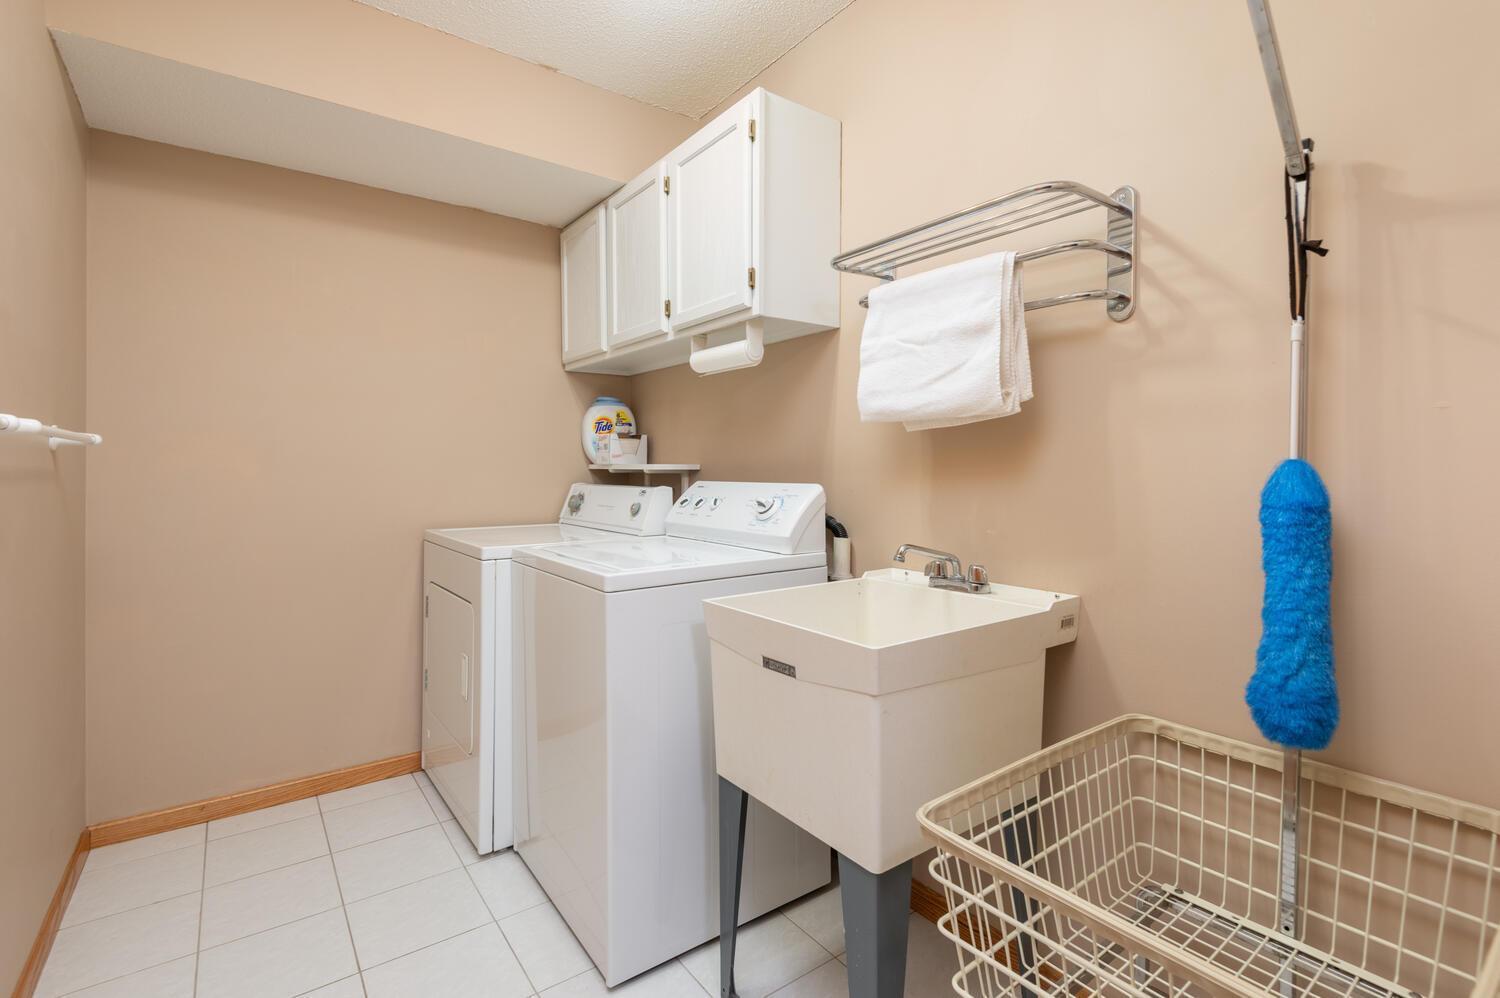 Finished lower level laundry room with ceramic tile flooring, laundry tub and storage cabinet. Very nice and clean!